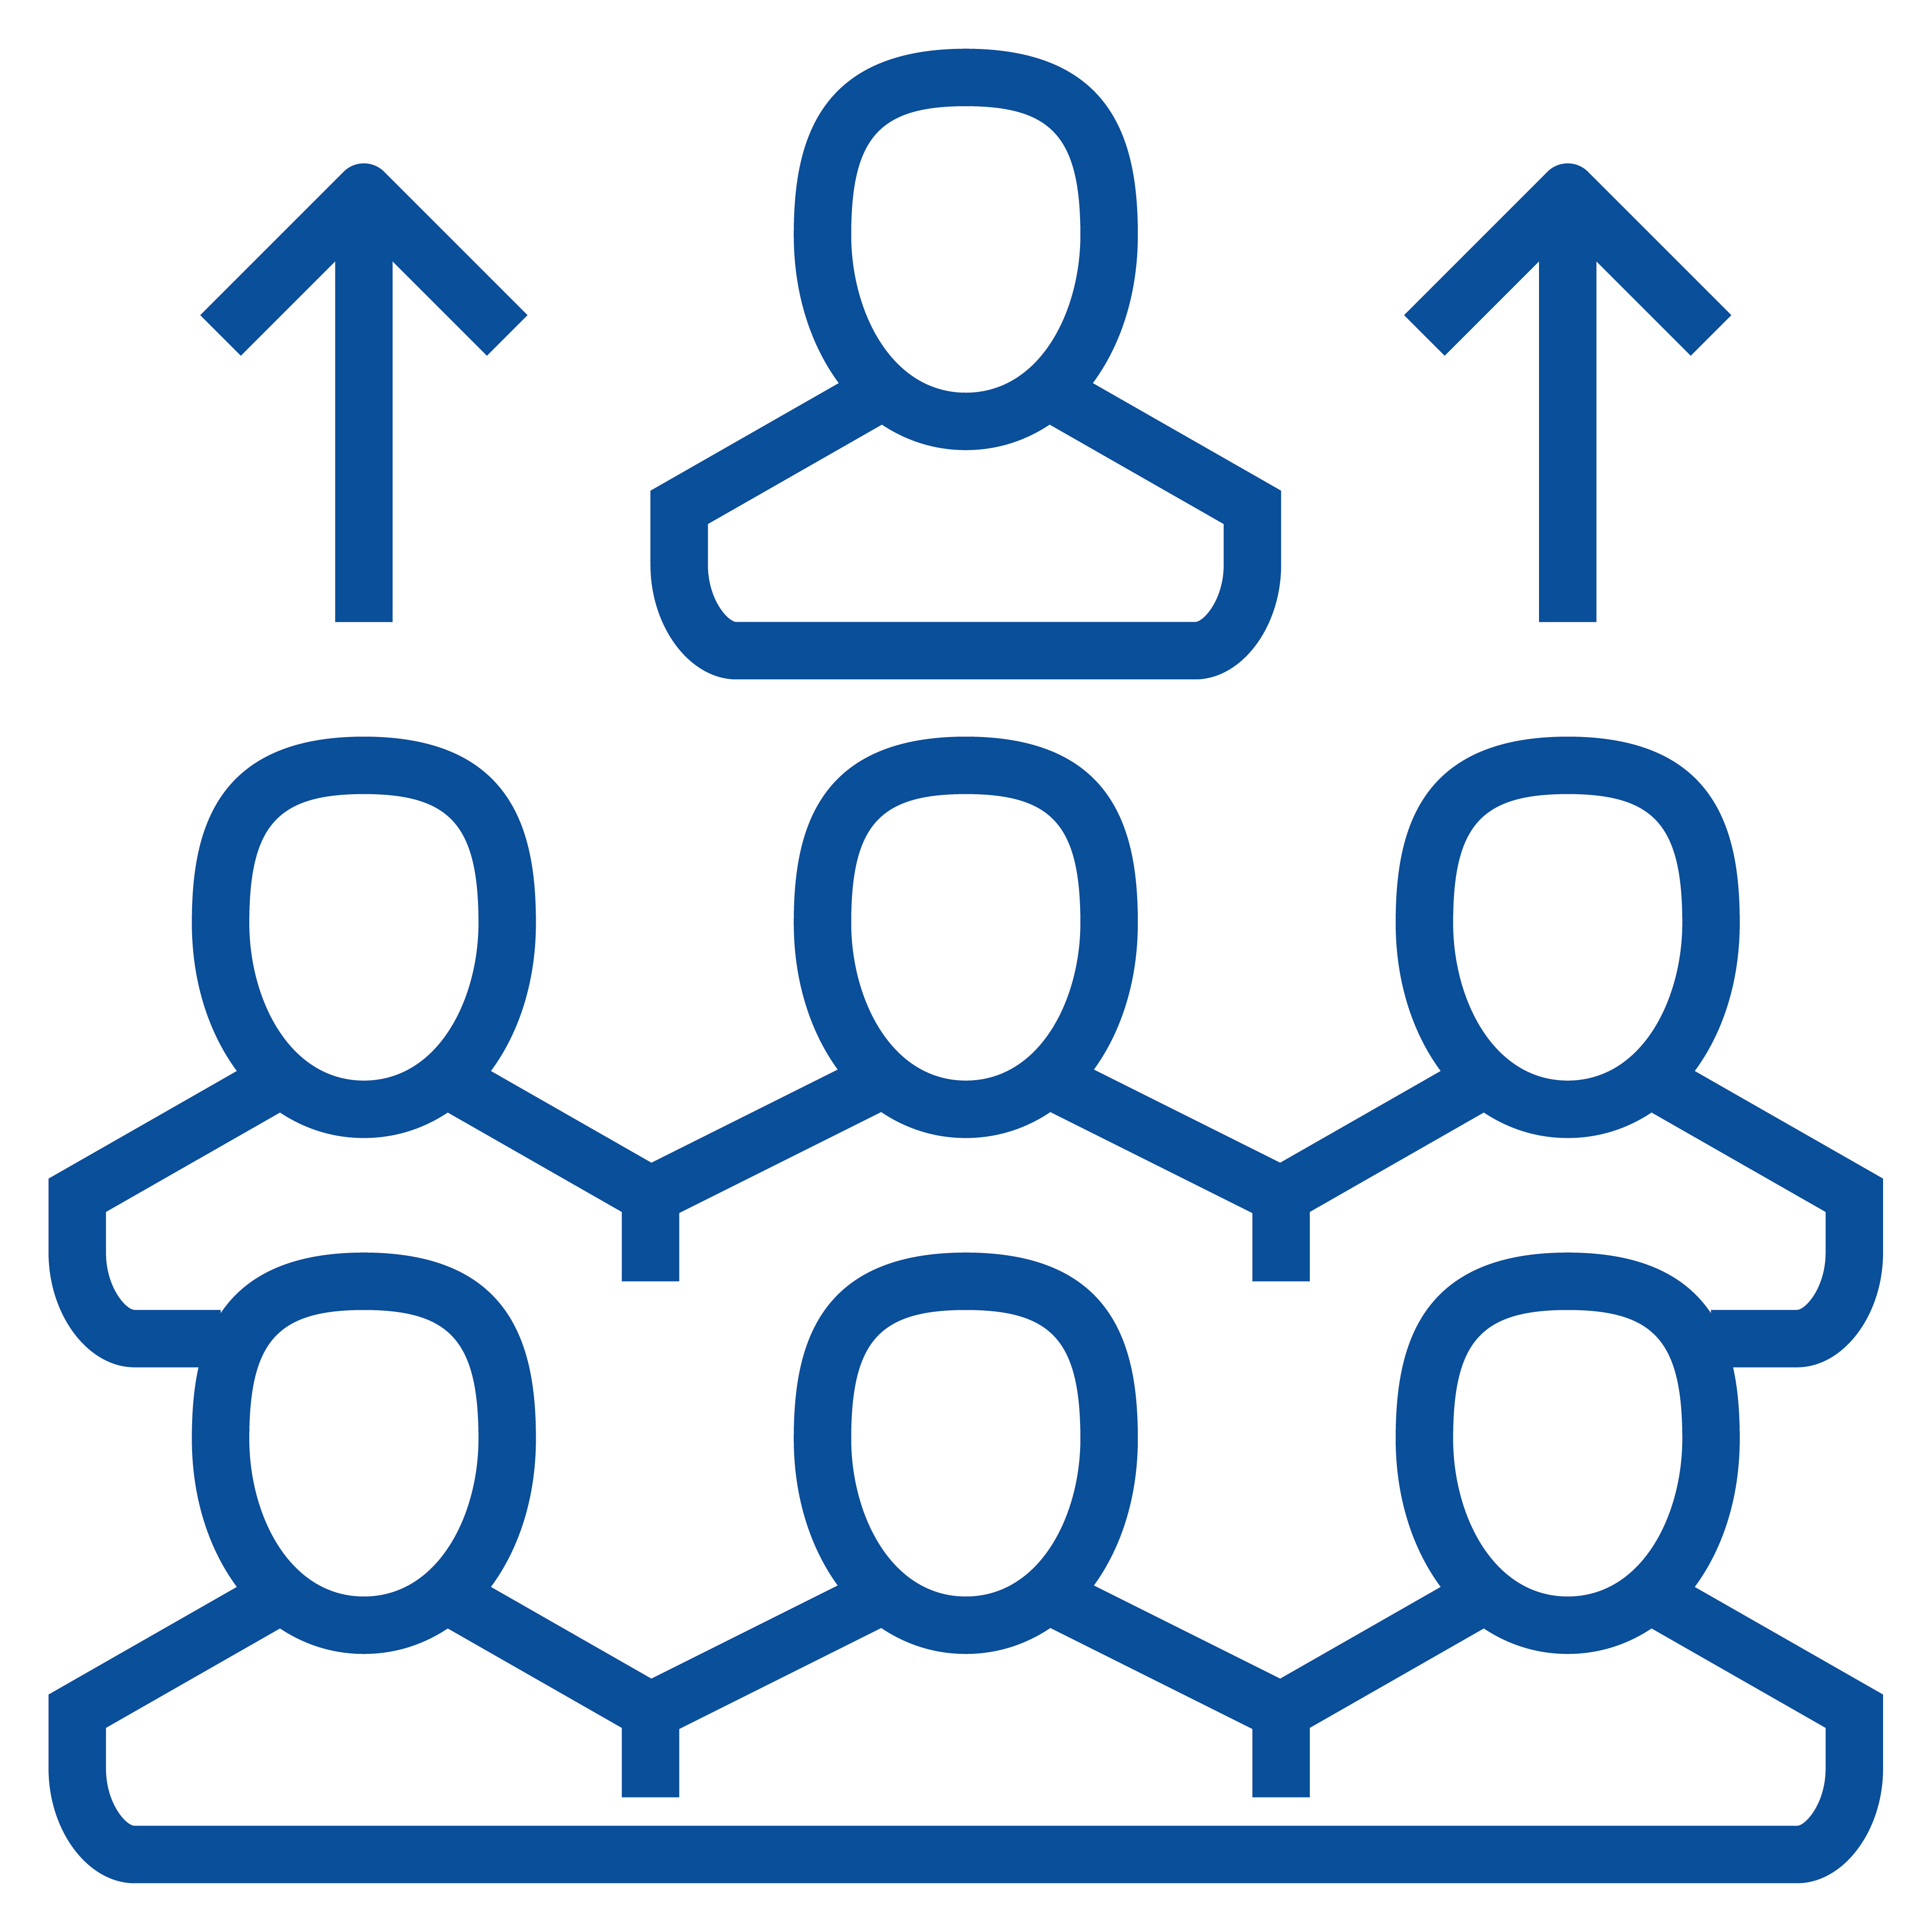 Icon showing a person - out of a group of people - being promoted at work.